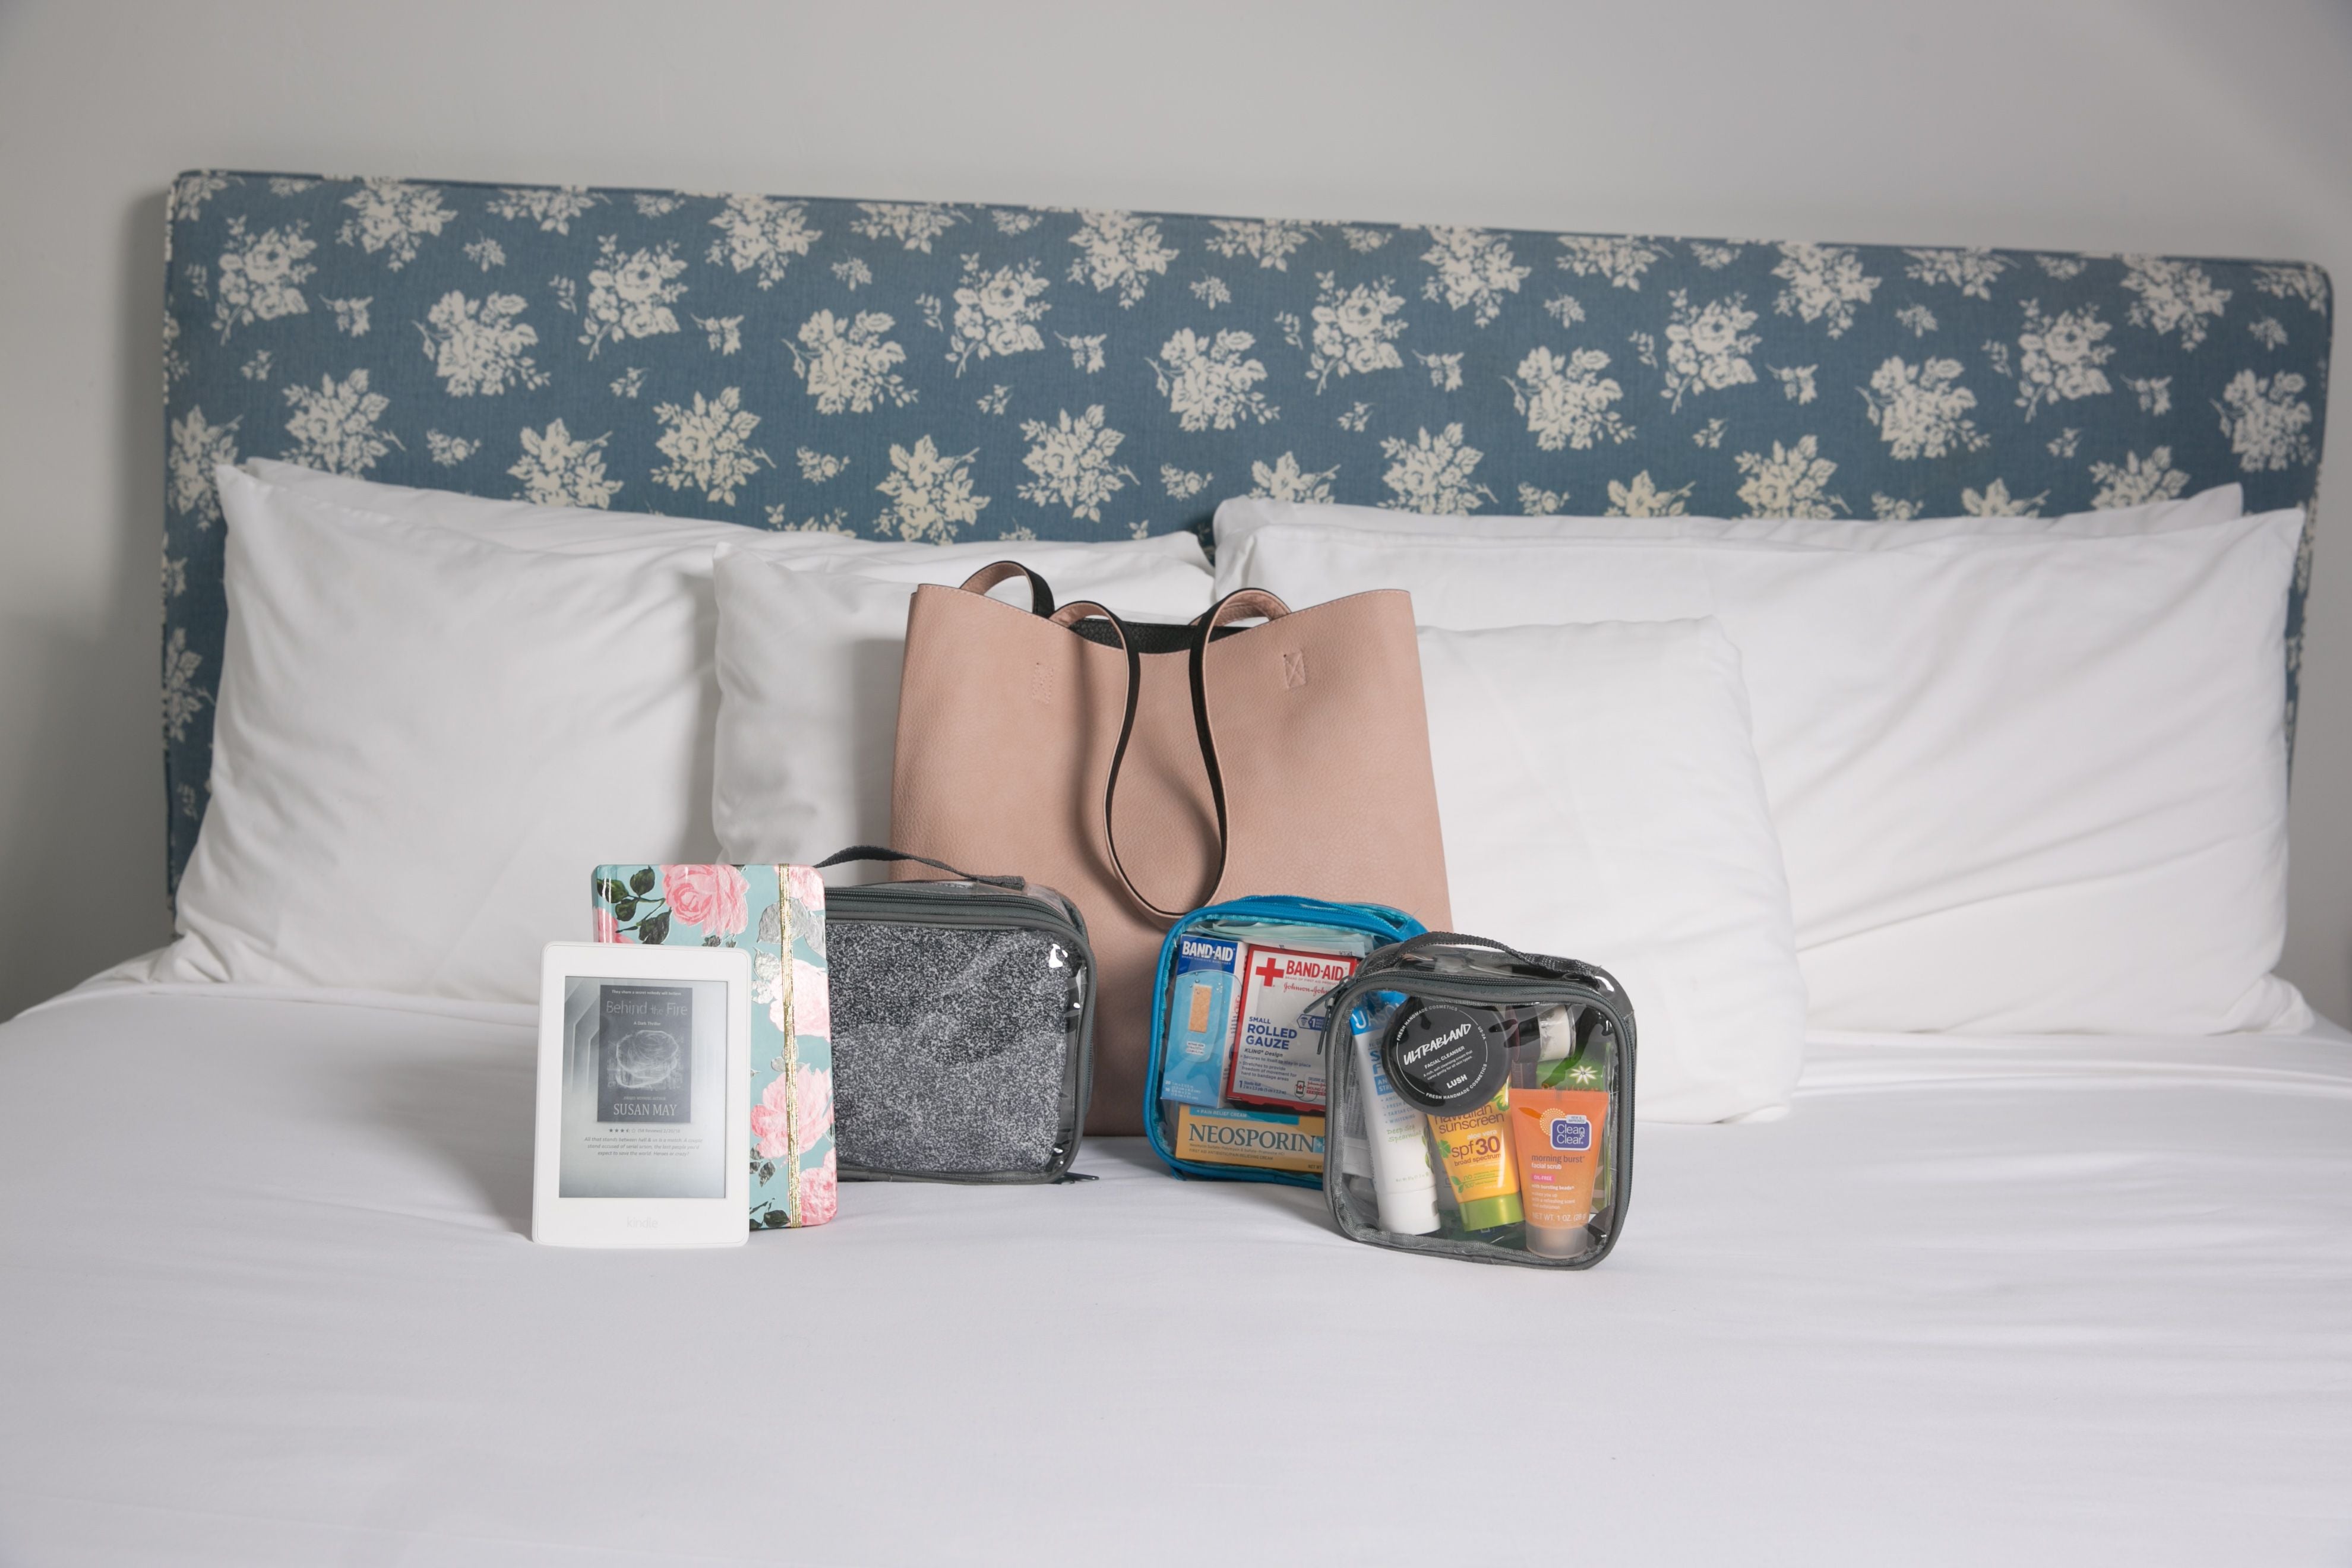 Overnight Trip Packing List: Tips + Free Checklist – EzPacking